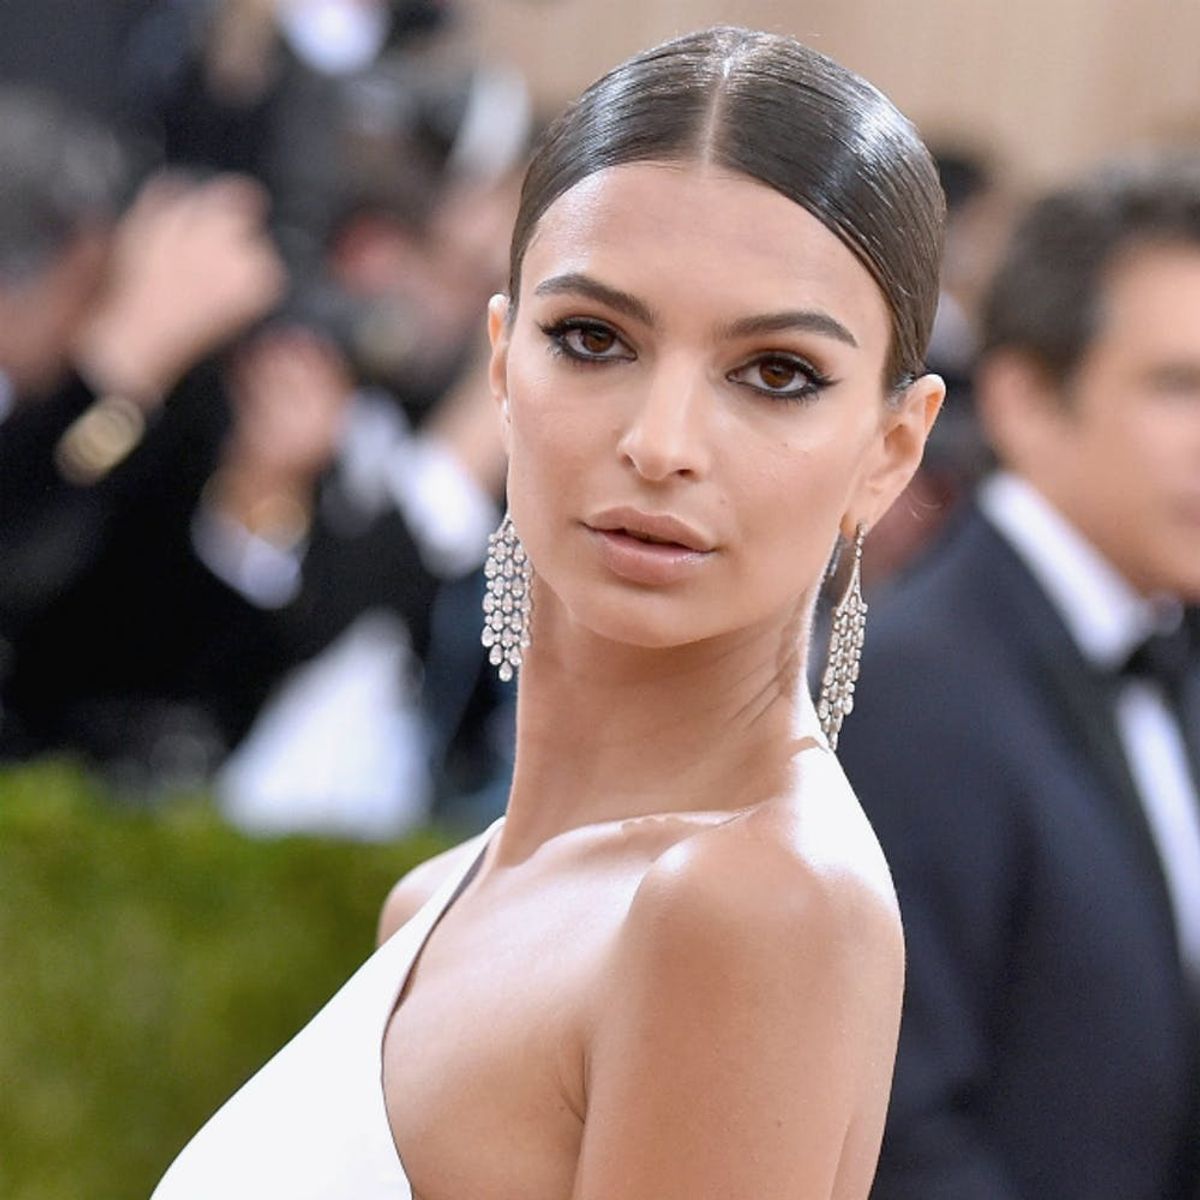 Model Emily Ratajkowski Dishes on the Surprising Impact Her Looks Have Had on Her Life